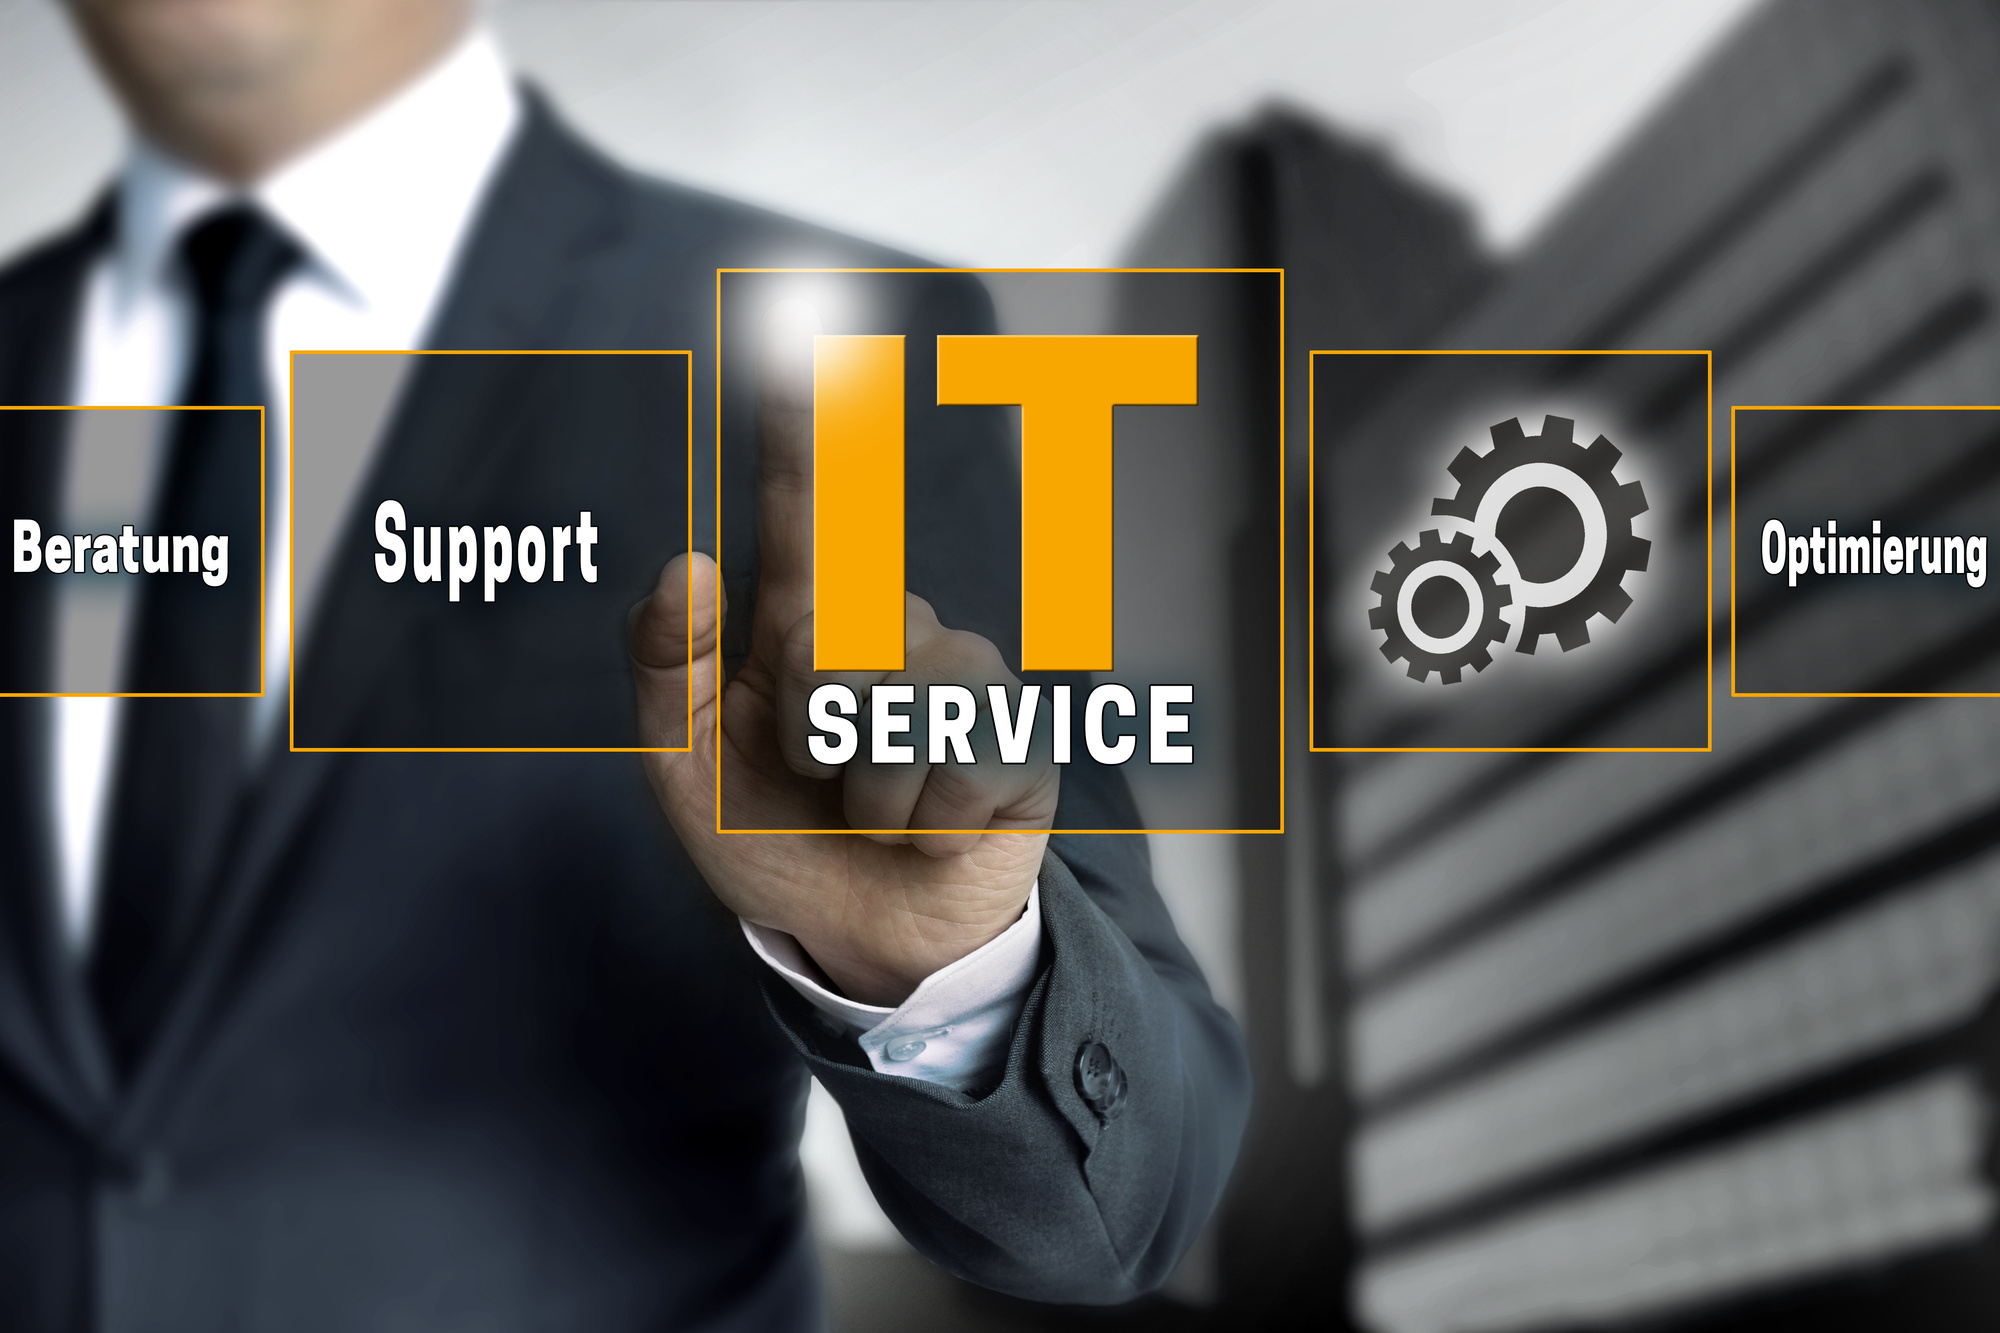 managed IT services